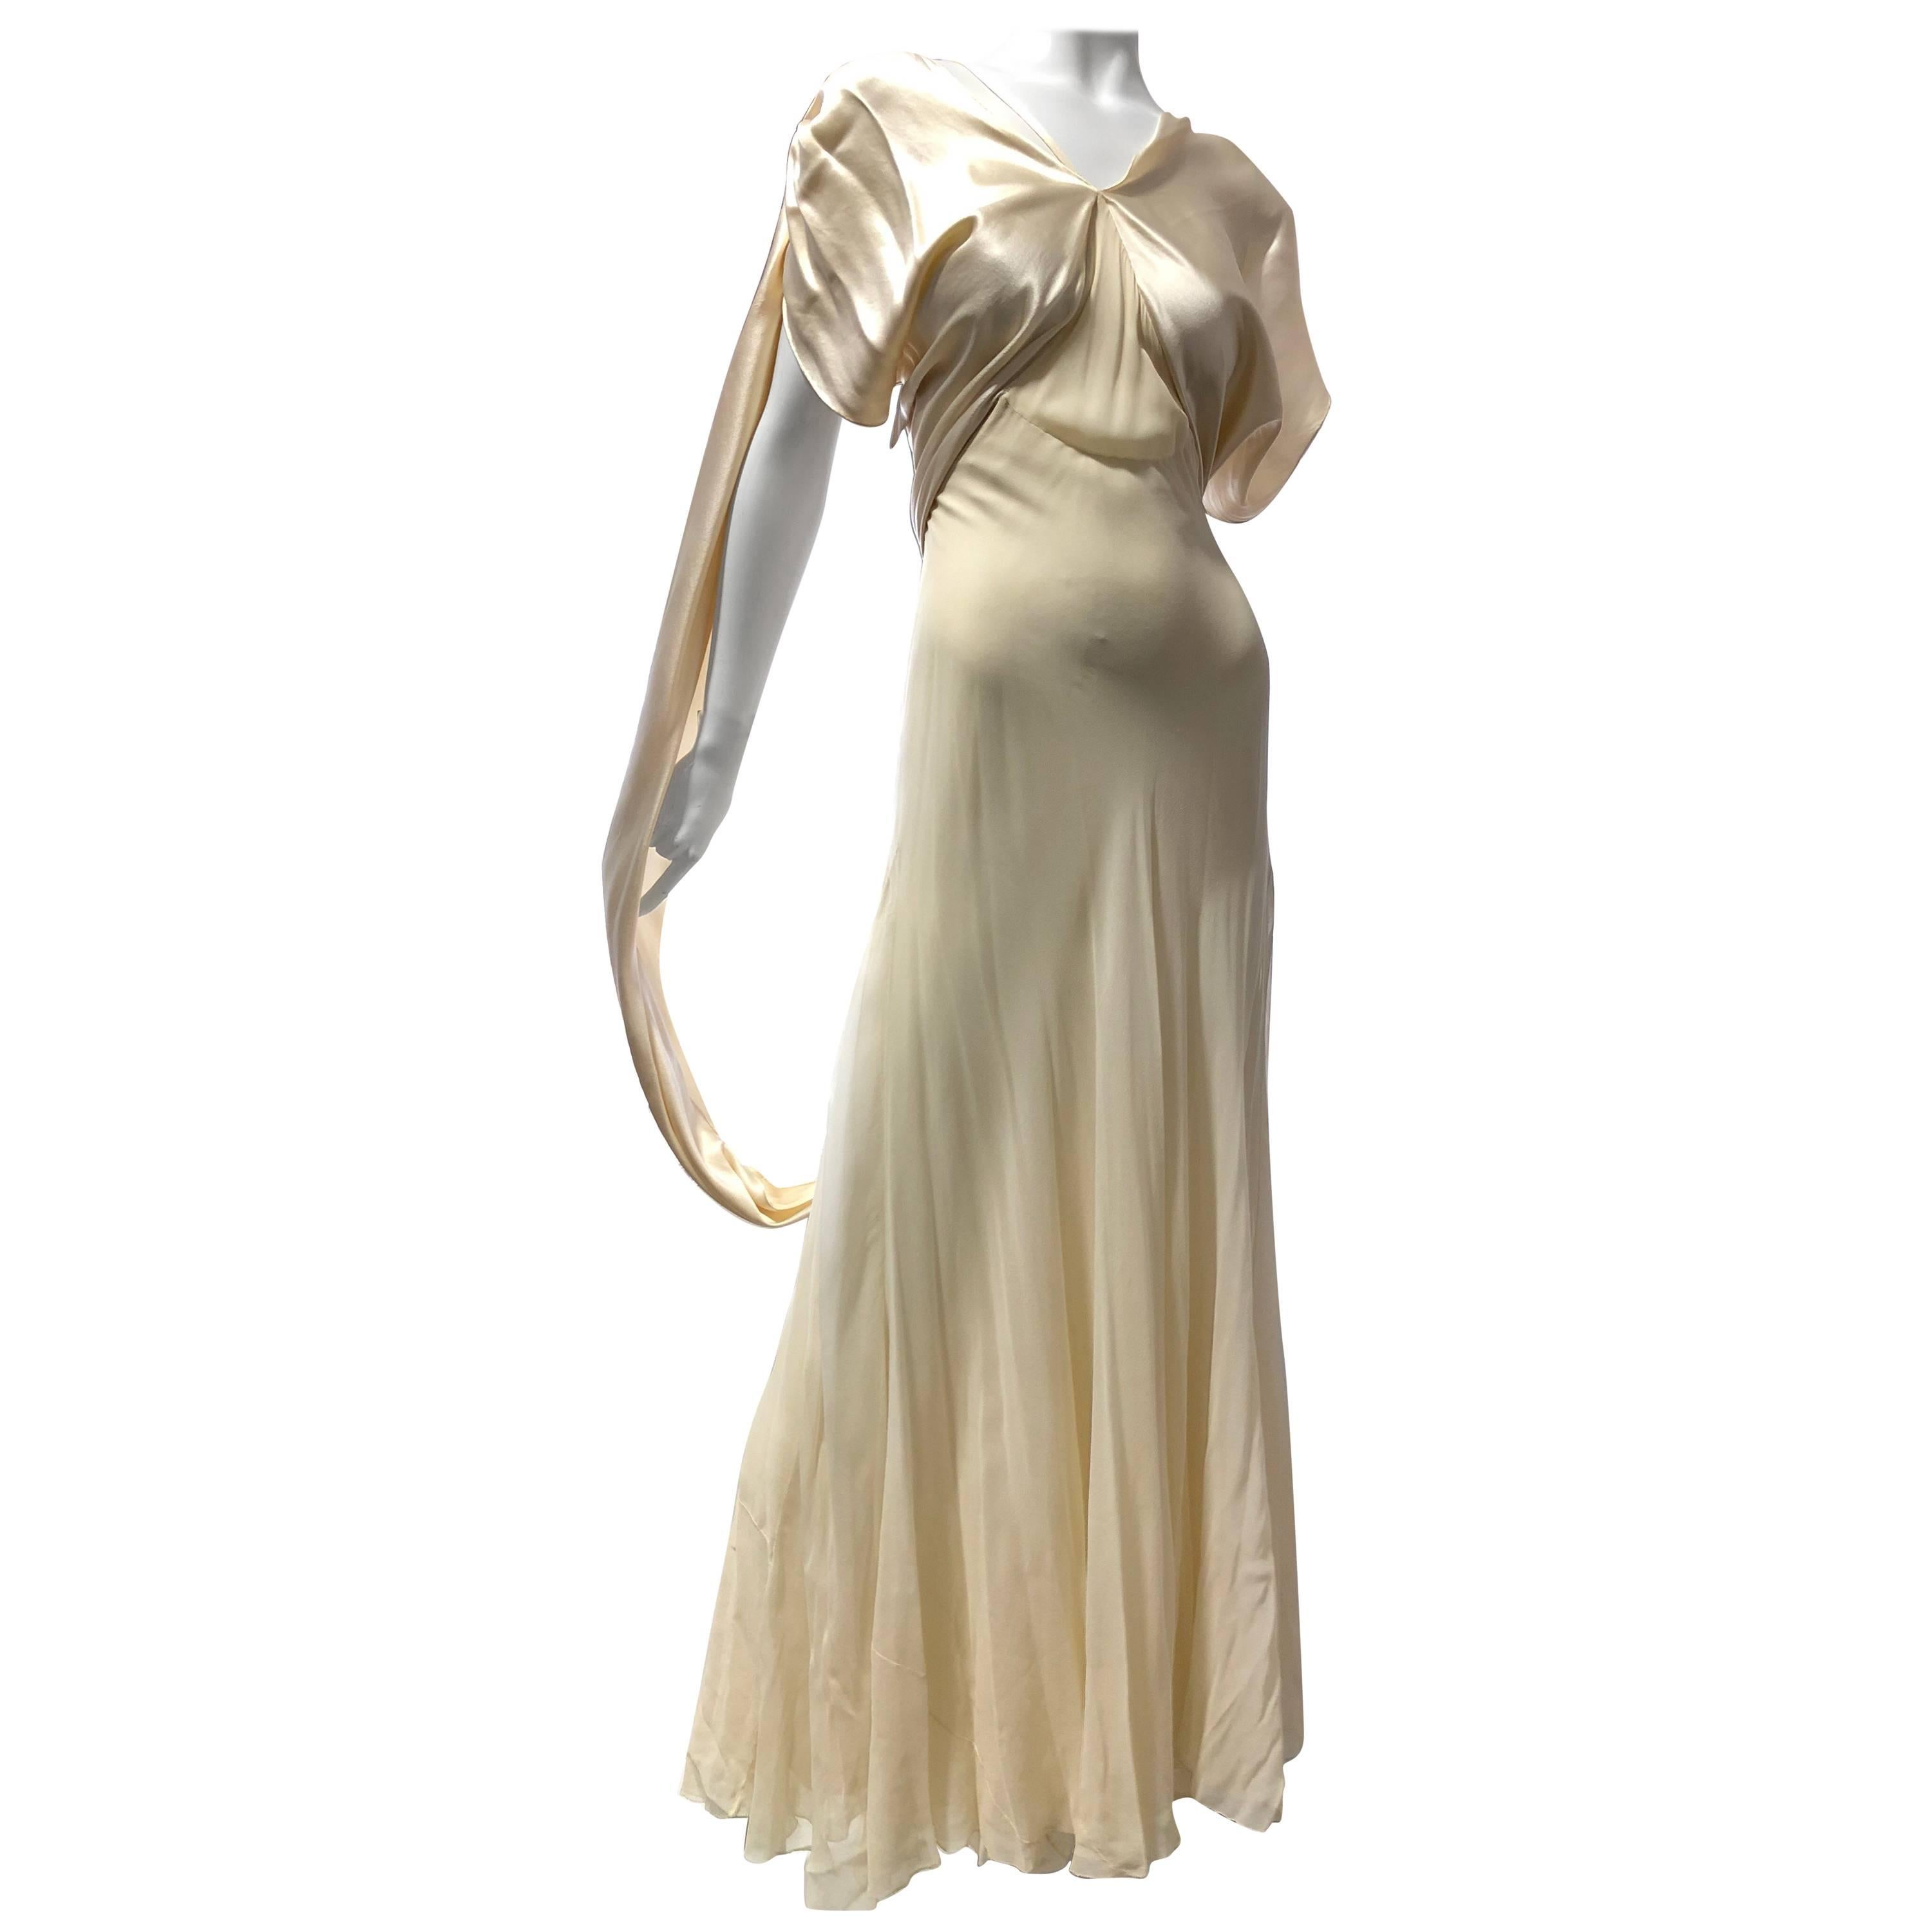 Hattie Carnegie Art Deco Bias Gown in Candlelight Silk Satin and Chiffon, 1930s 